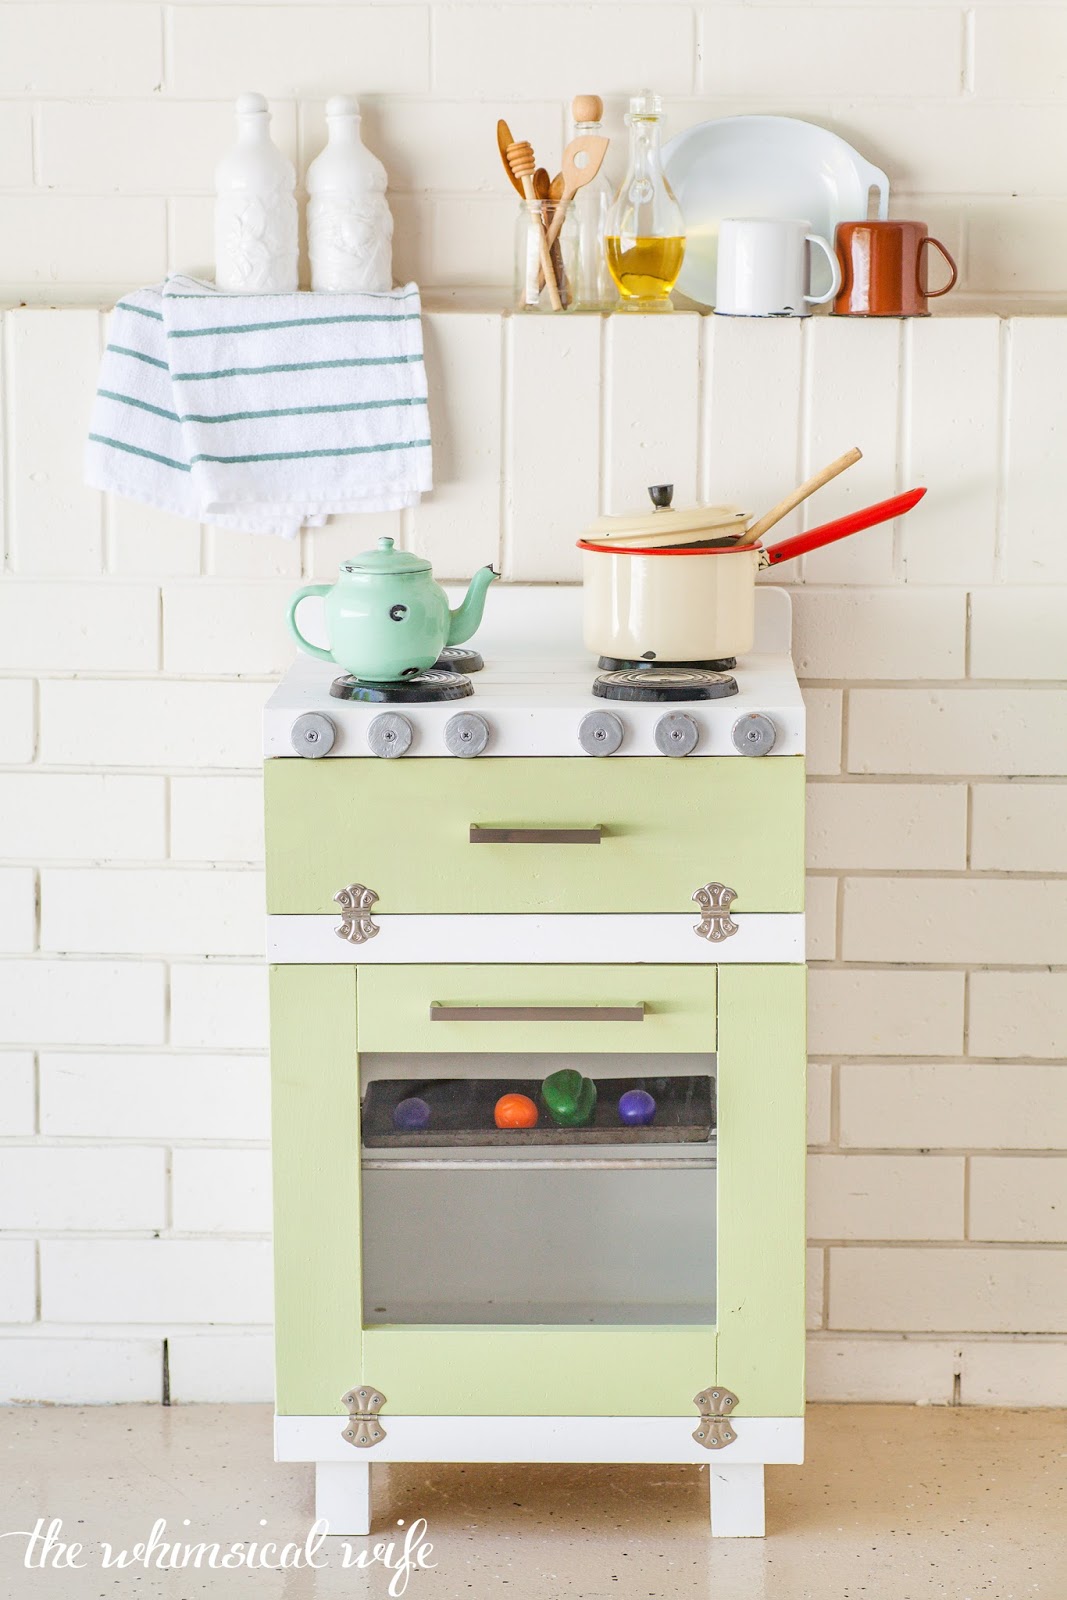 DIY Toy Oven Makeover